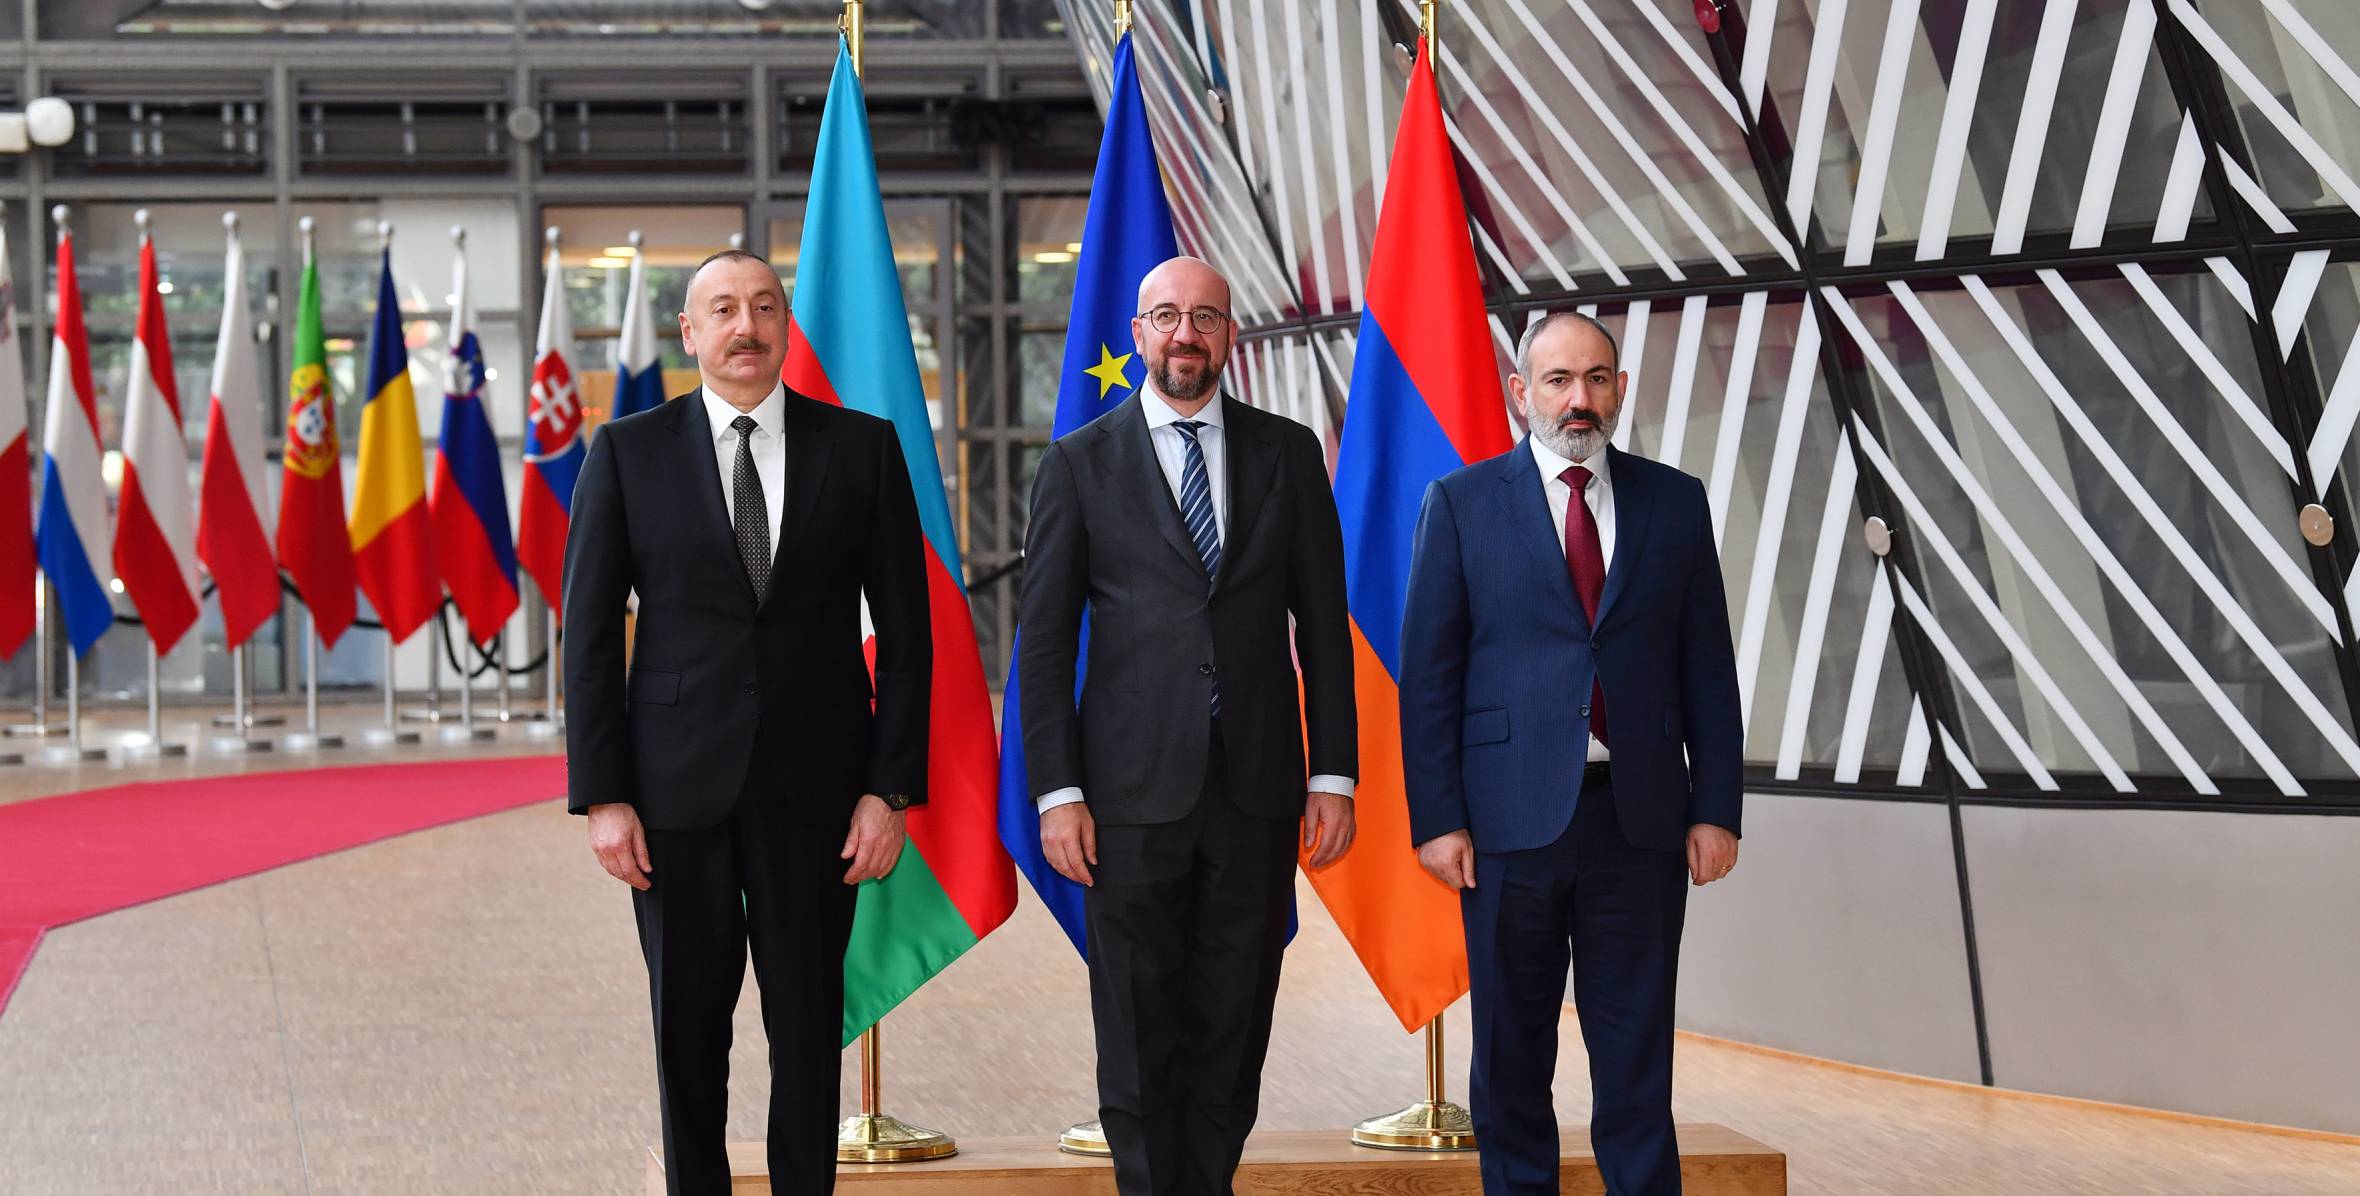 Ilham Aliyev had meeting with President of European Council and Prime Minister of Armenia in Brussels